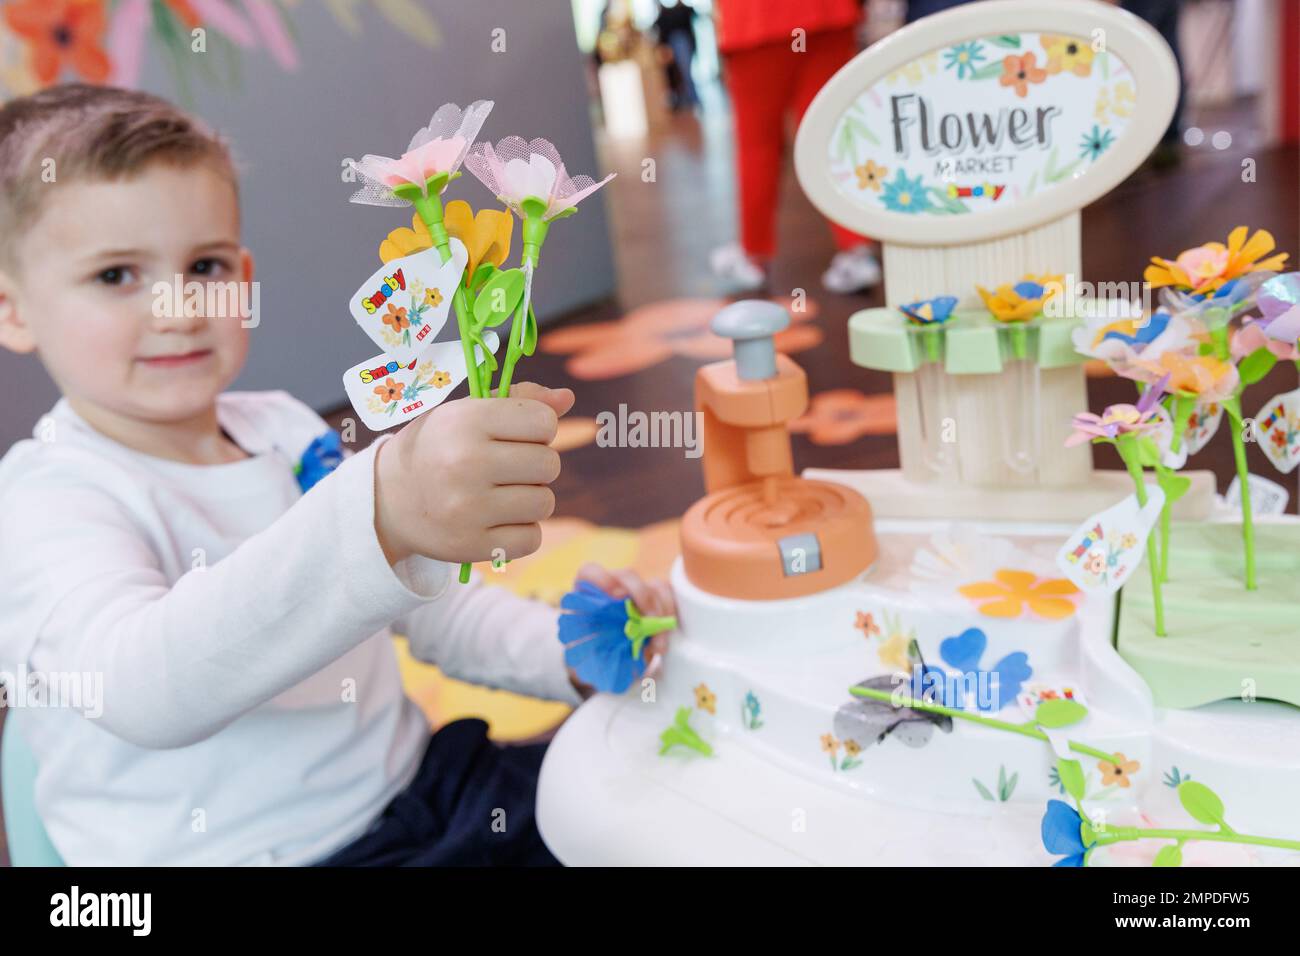 Nuremberg, Germany. 31st Jan, 2023. Nick plays with Flower Market from Smoby  Toys during the Toy Fair novelty show. The toy allows children to create  their own flowers. The 72nd Spielwarenmesse runs